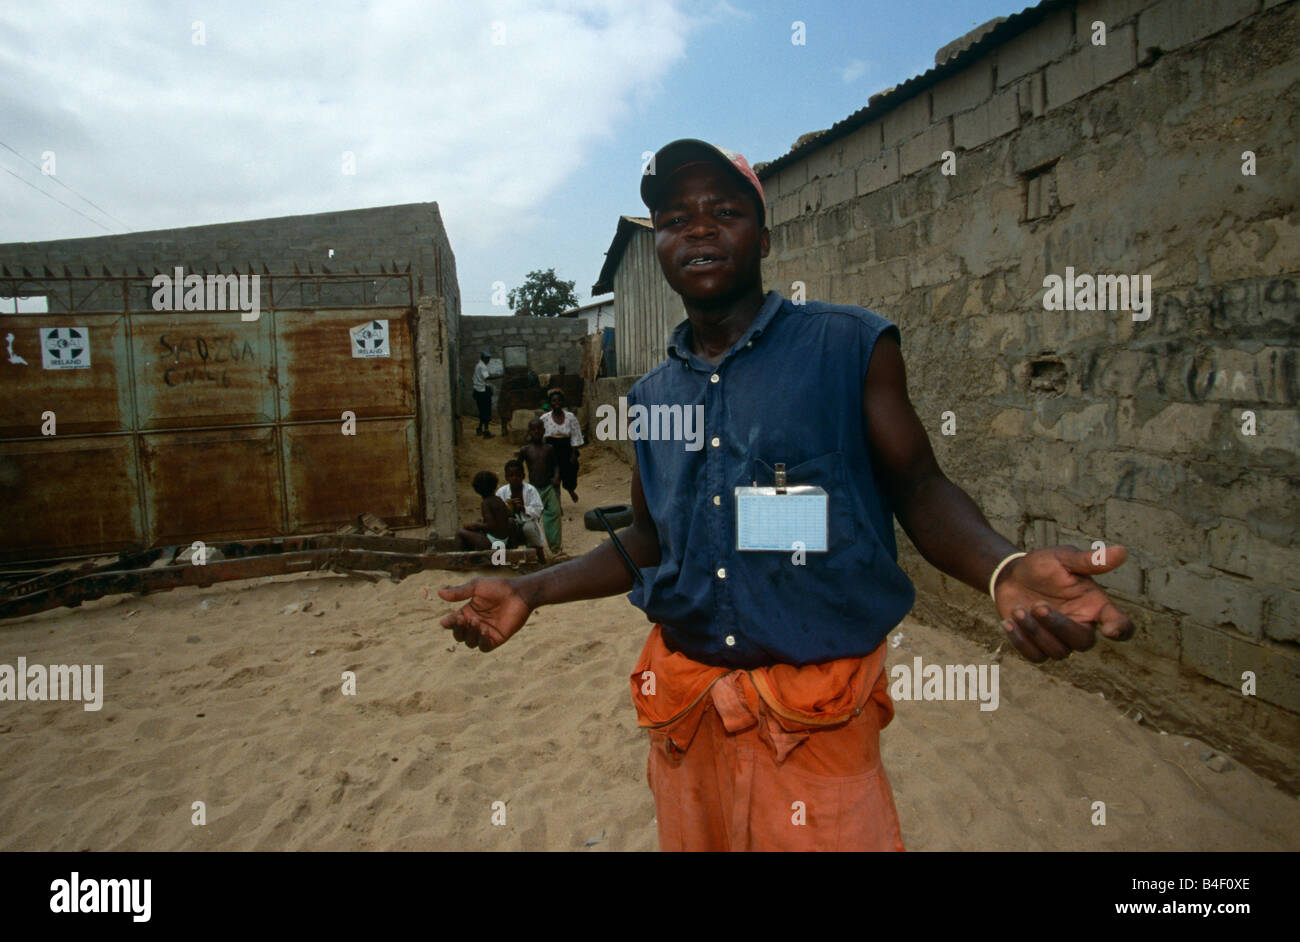 At a camp for displaced people in Angola. Stock Photo